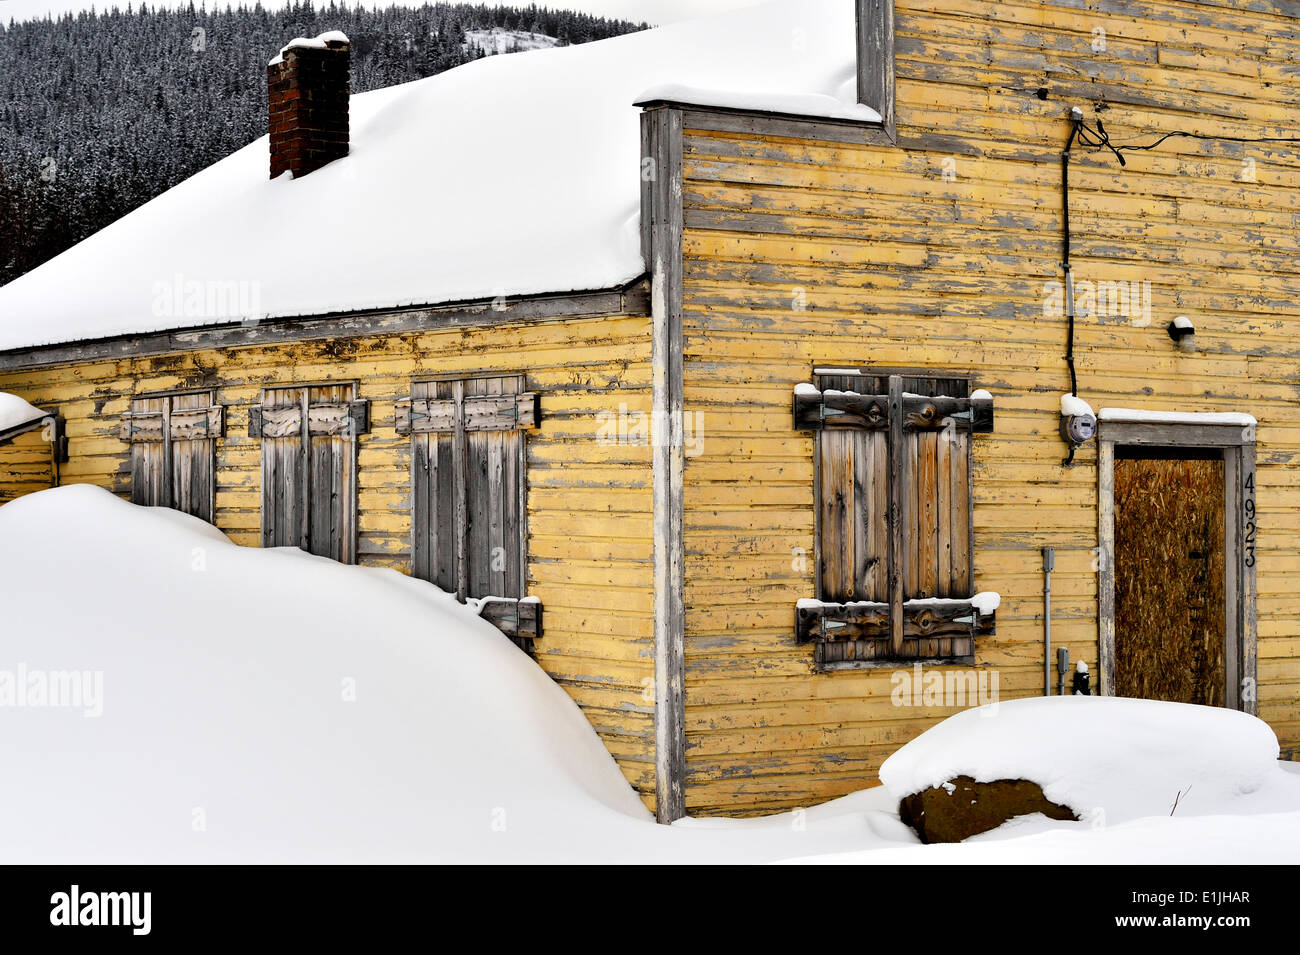 A section view of an old building standing under the heavy winter snow Stock Photo